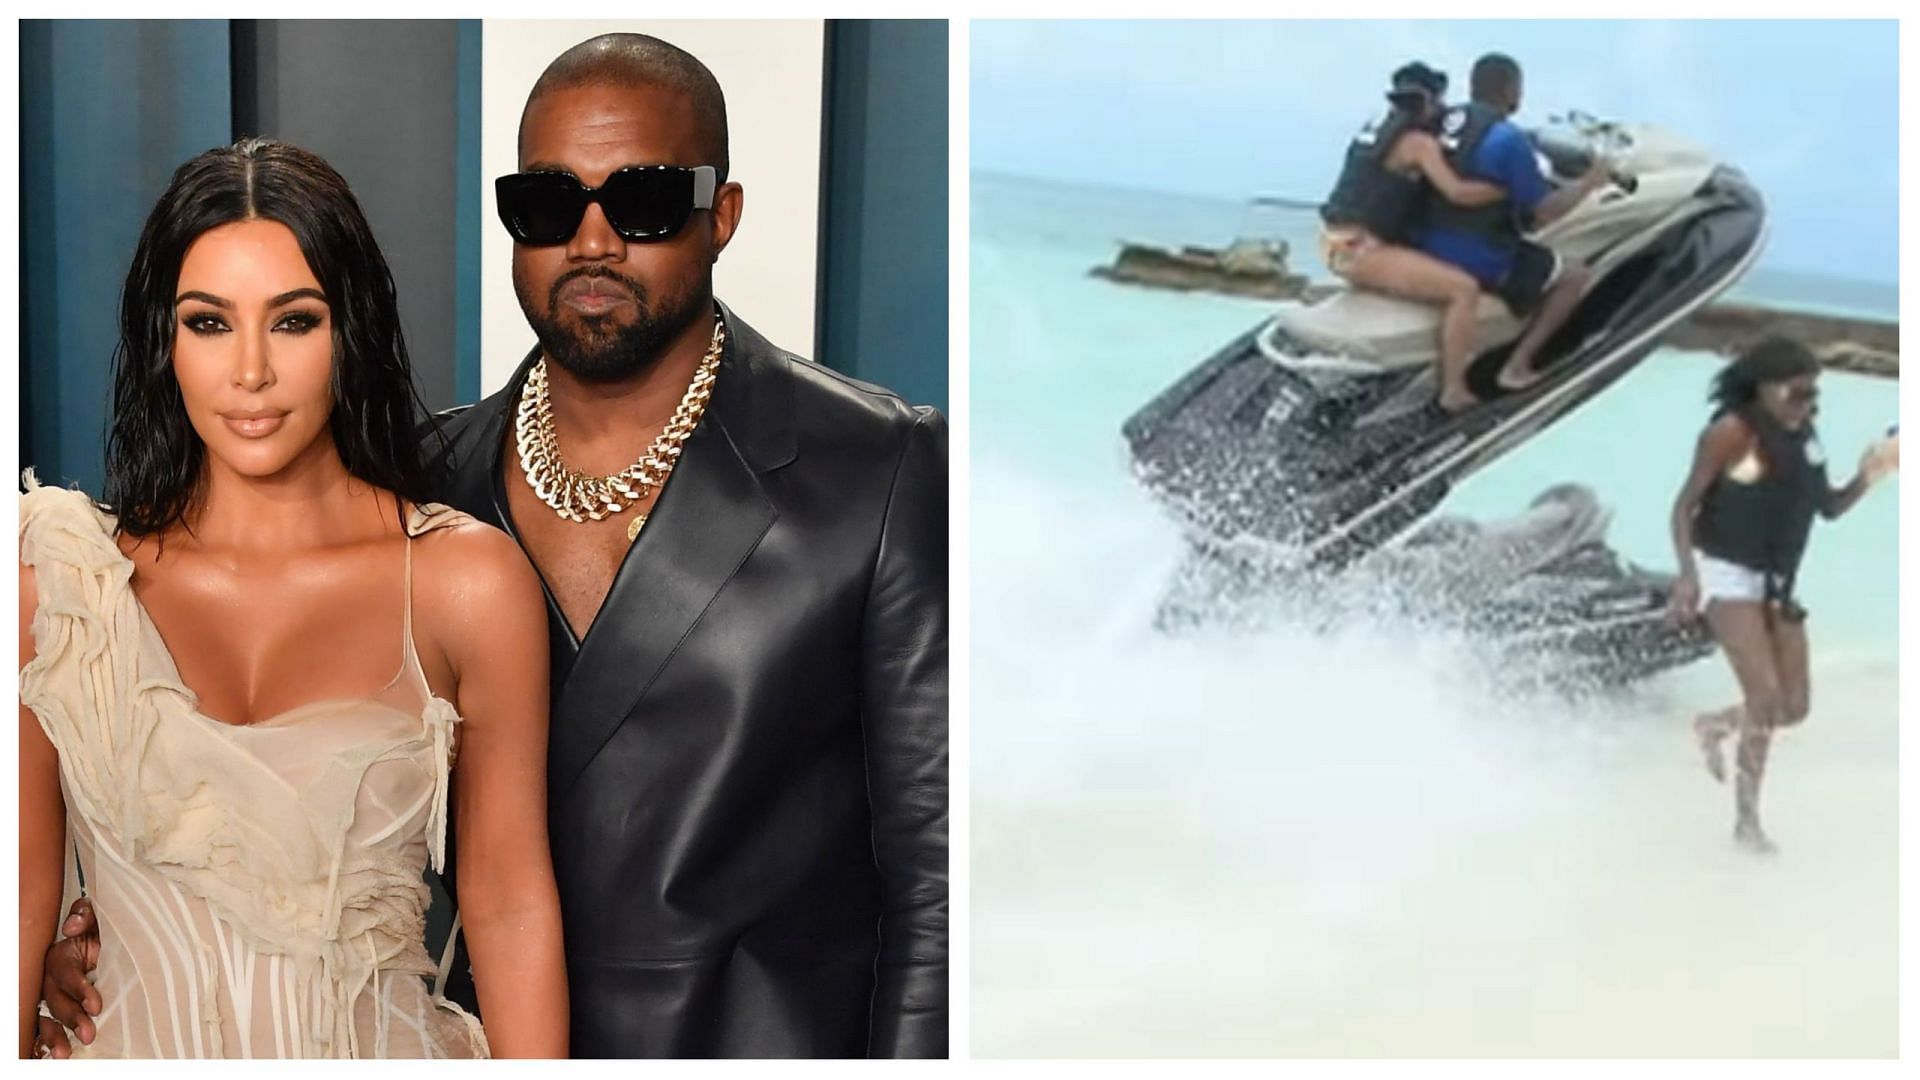 The viral jet ski accident video does not feature Kanye West and Kim Kardashian (Image via Allen Berezovsky/Getty Images and RM Videos/YouTube)